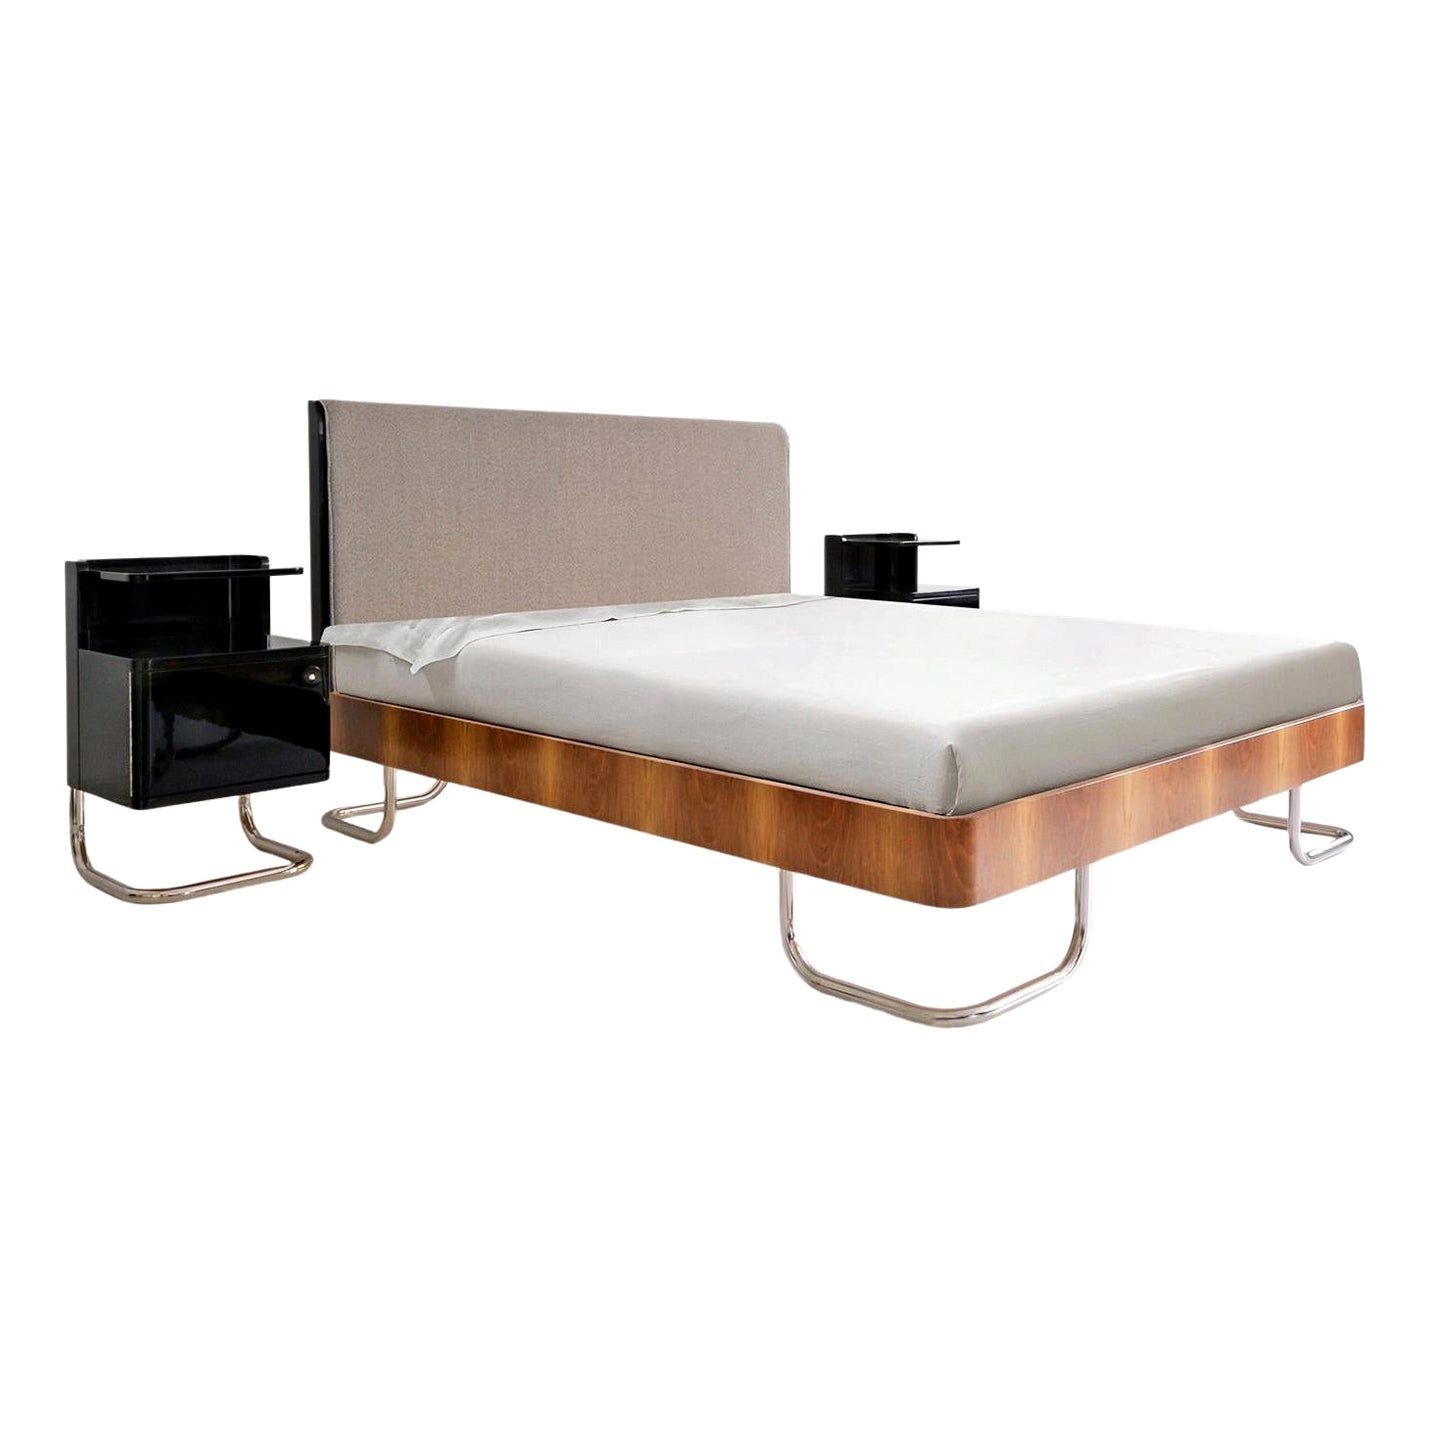 Bespoke Modern Contemporary Double Bed with Bedside Cabinets in Handcrafted Wood